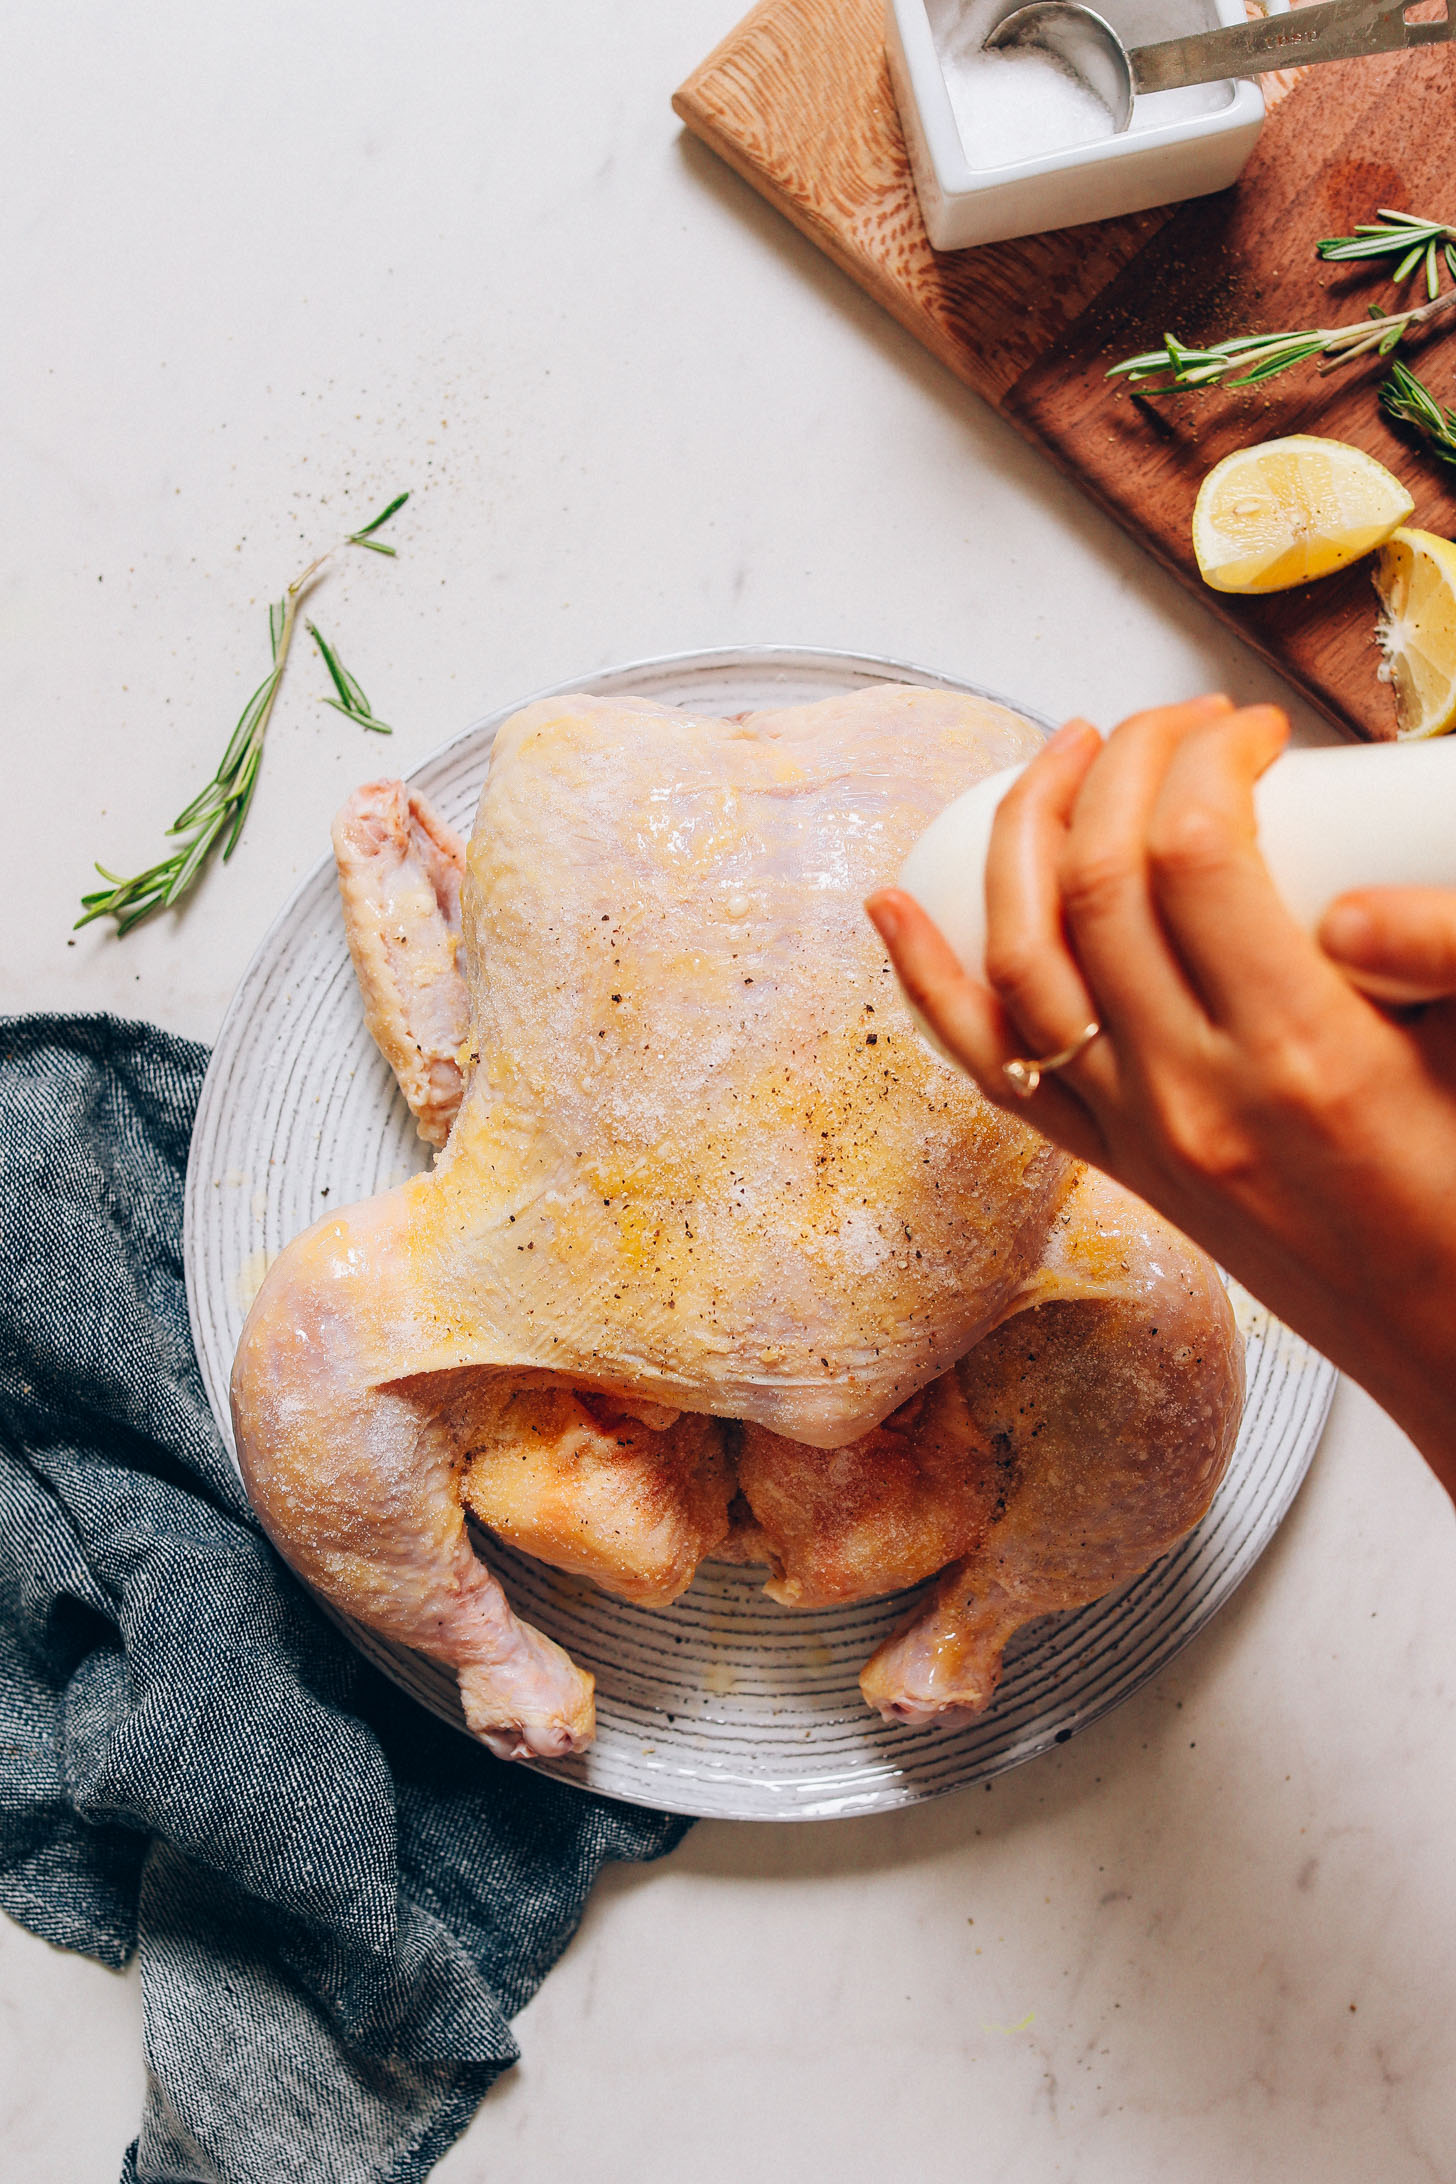 Sprinkling black pepper onto a chicken to make our delicious Oven Roasted Chicken recipe